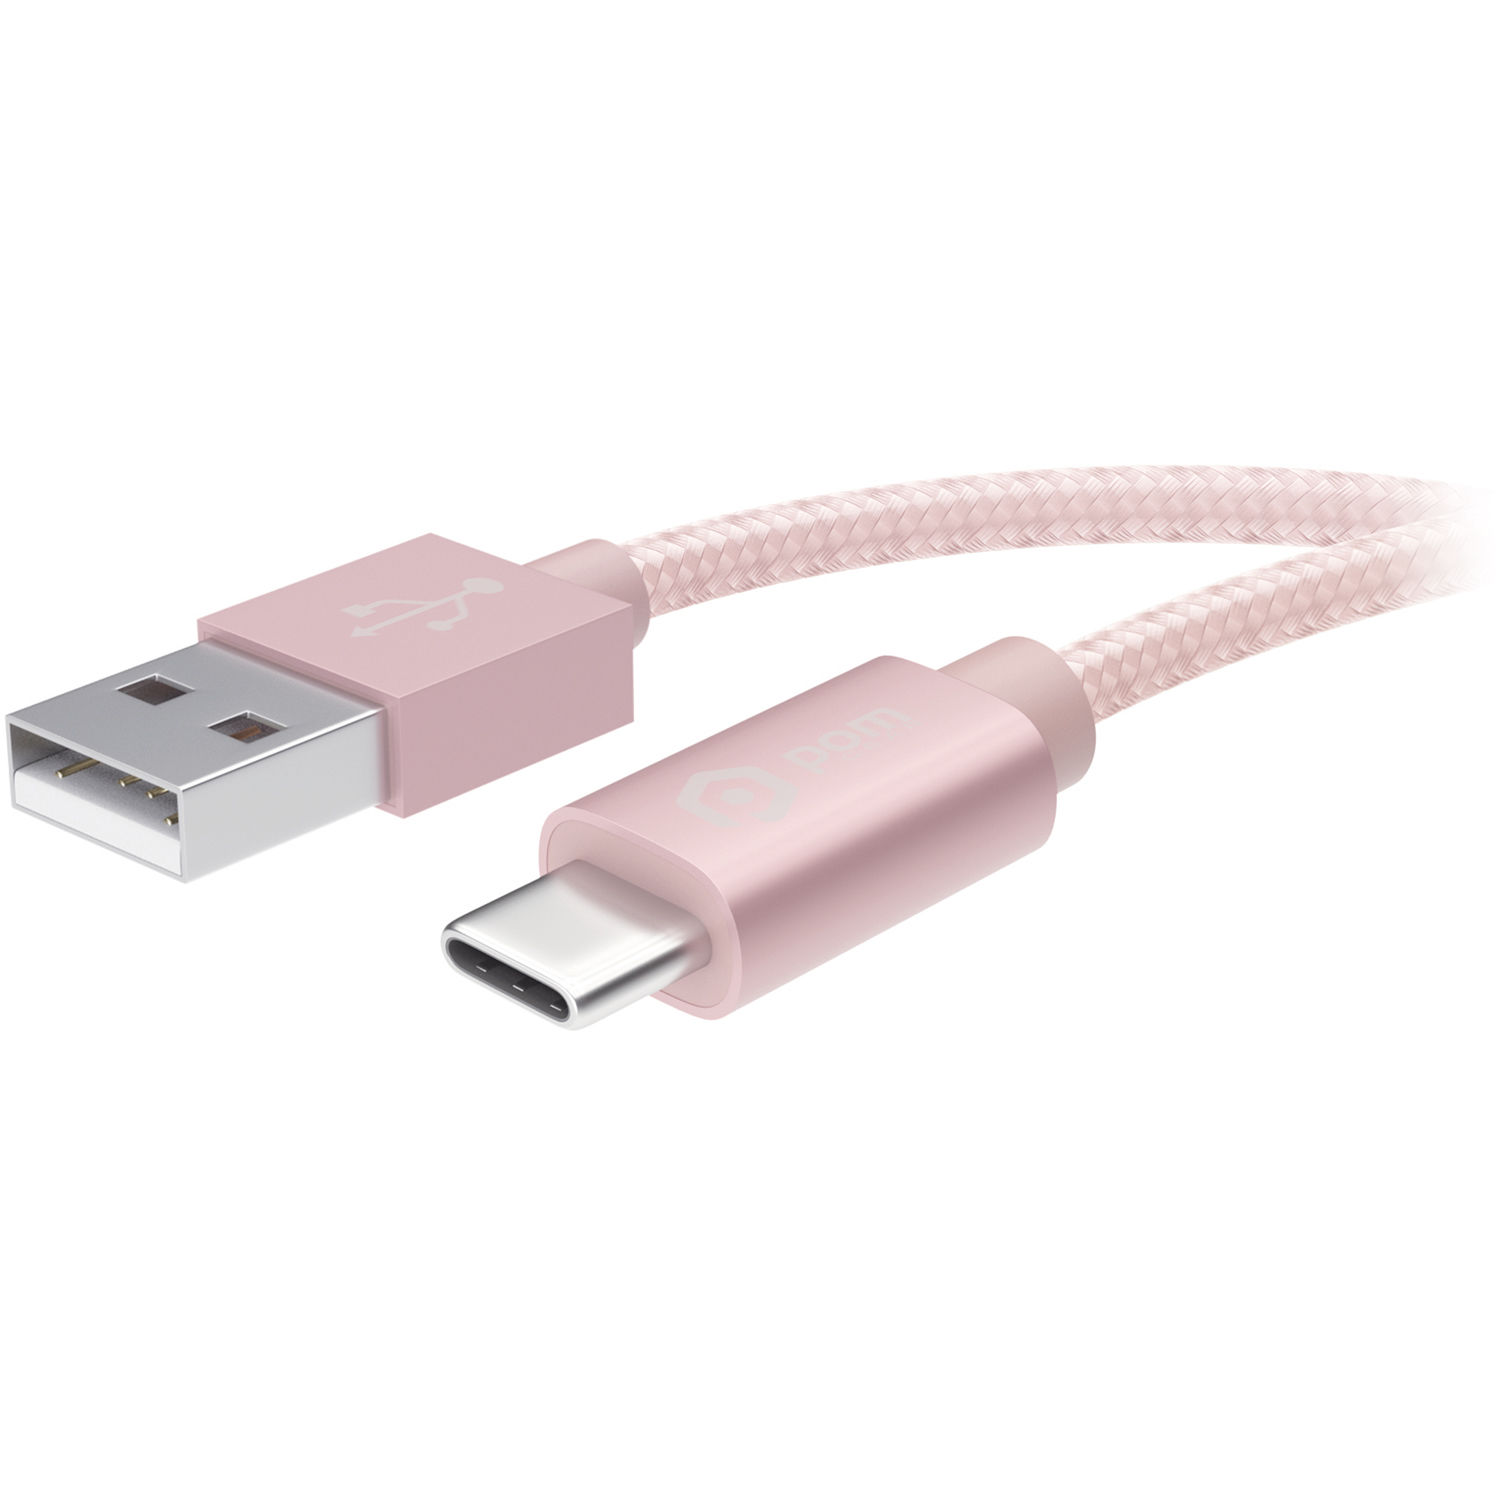 POM GEAR USB Type-C Male to USB Type-A Male Braided Charging Cable (6', Rose Gold)